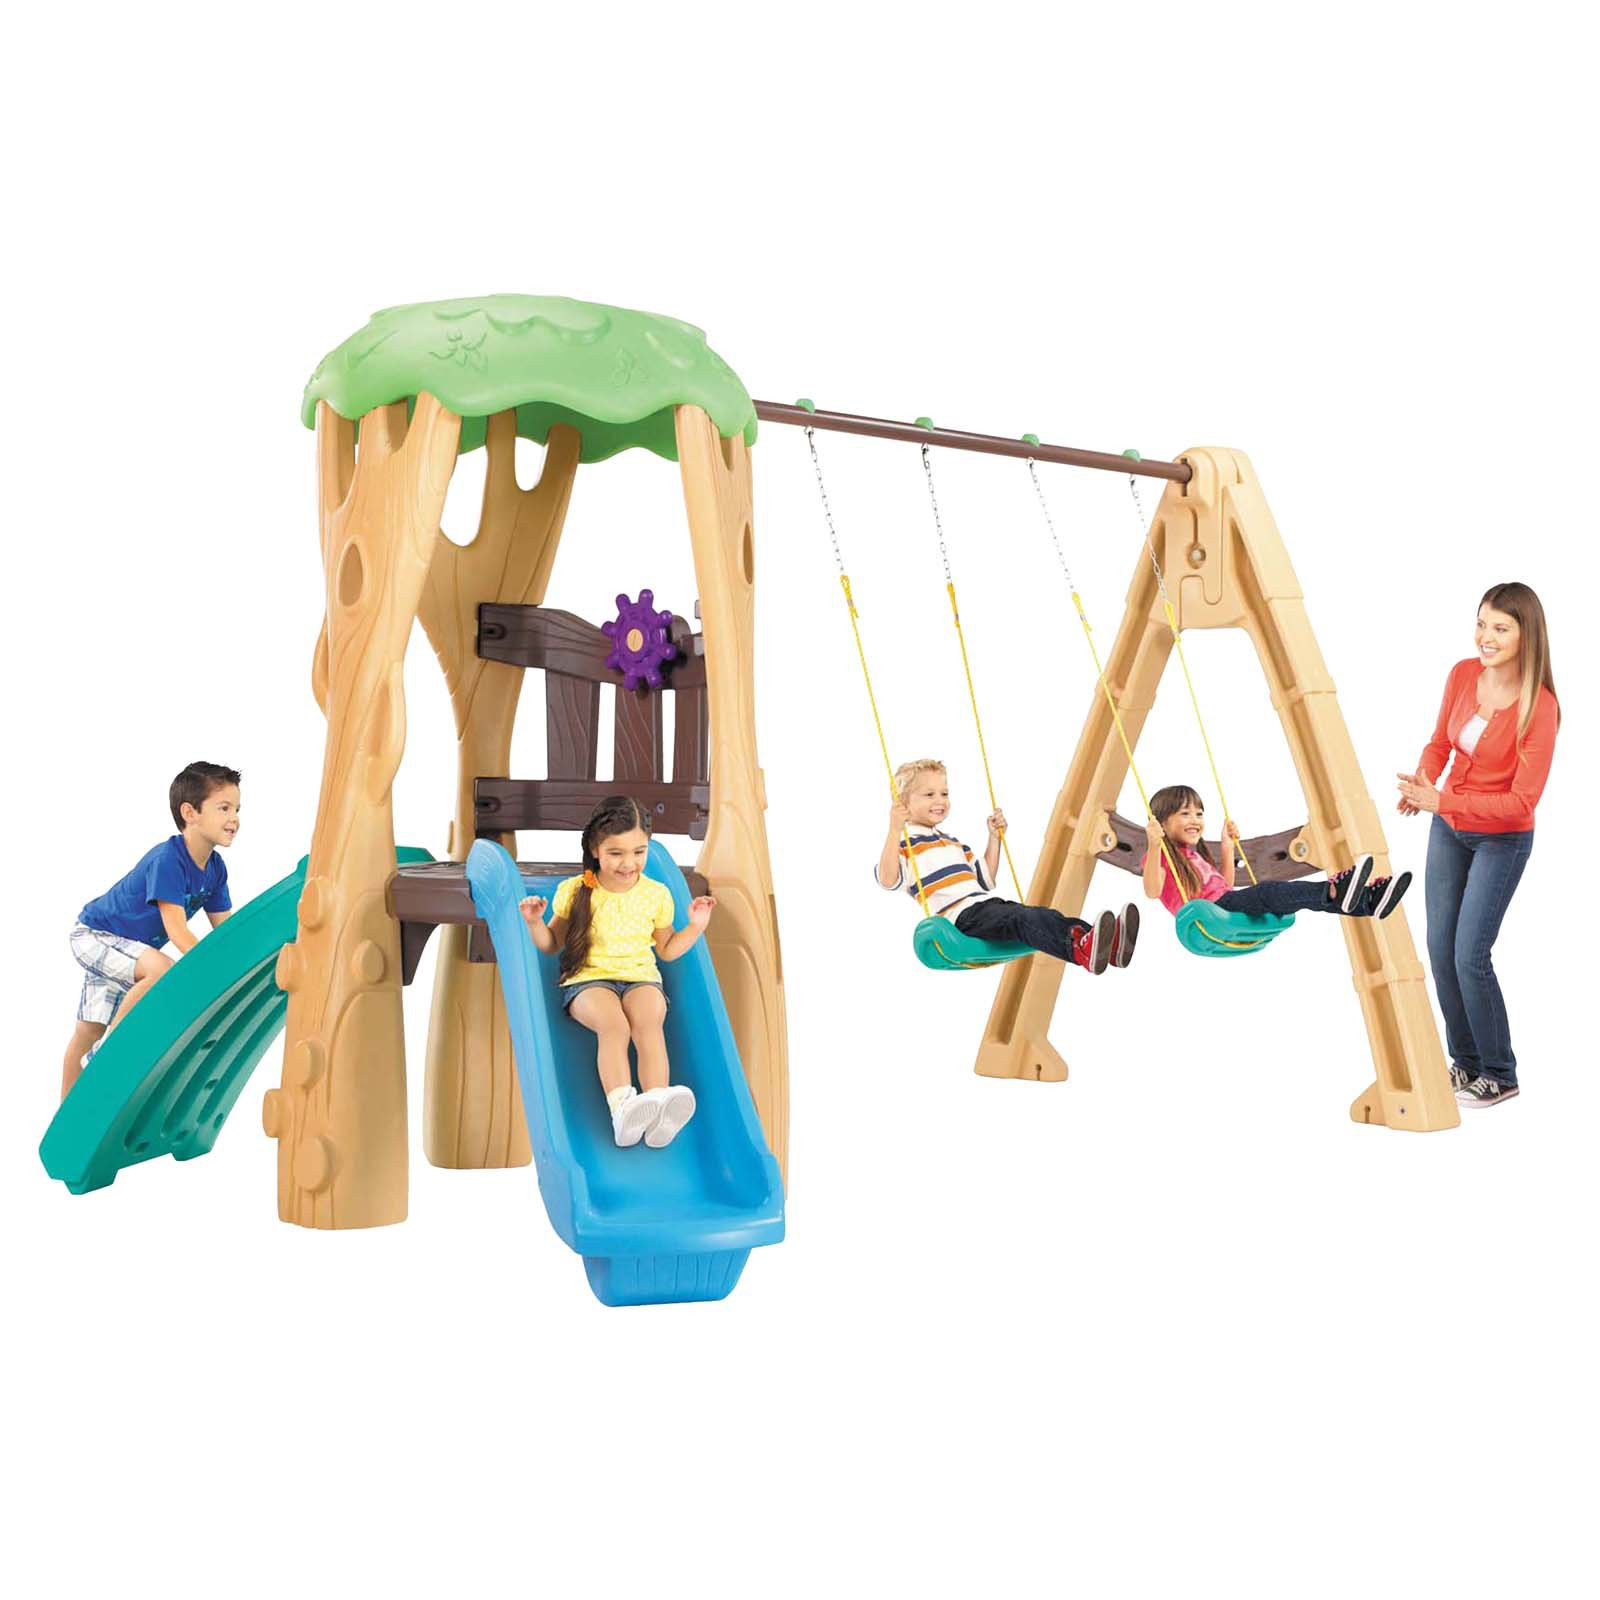 Kids Swing Sets For Sale
 Little Tikes Tree House Swing Set Indoor Playhouses at